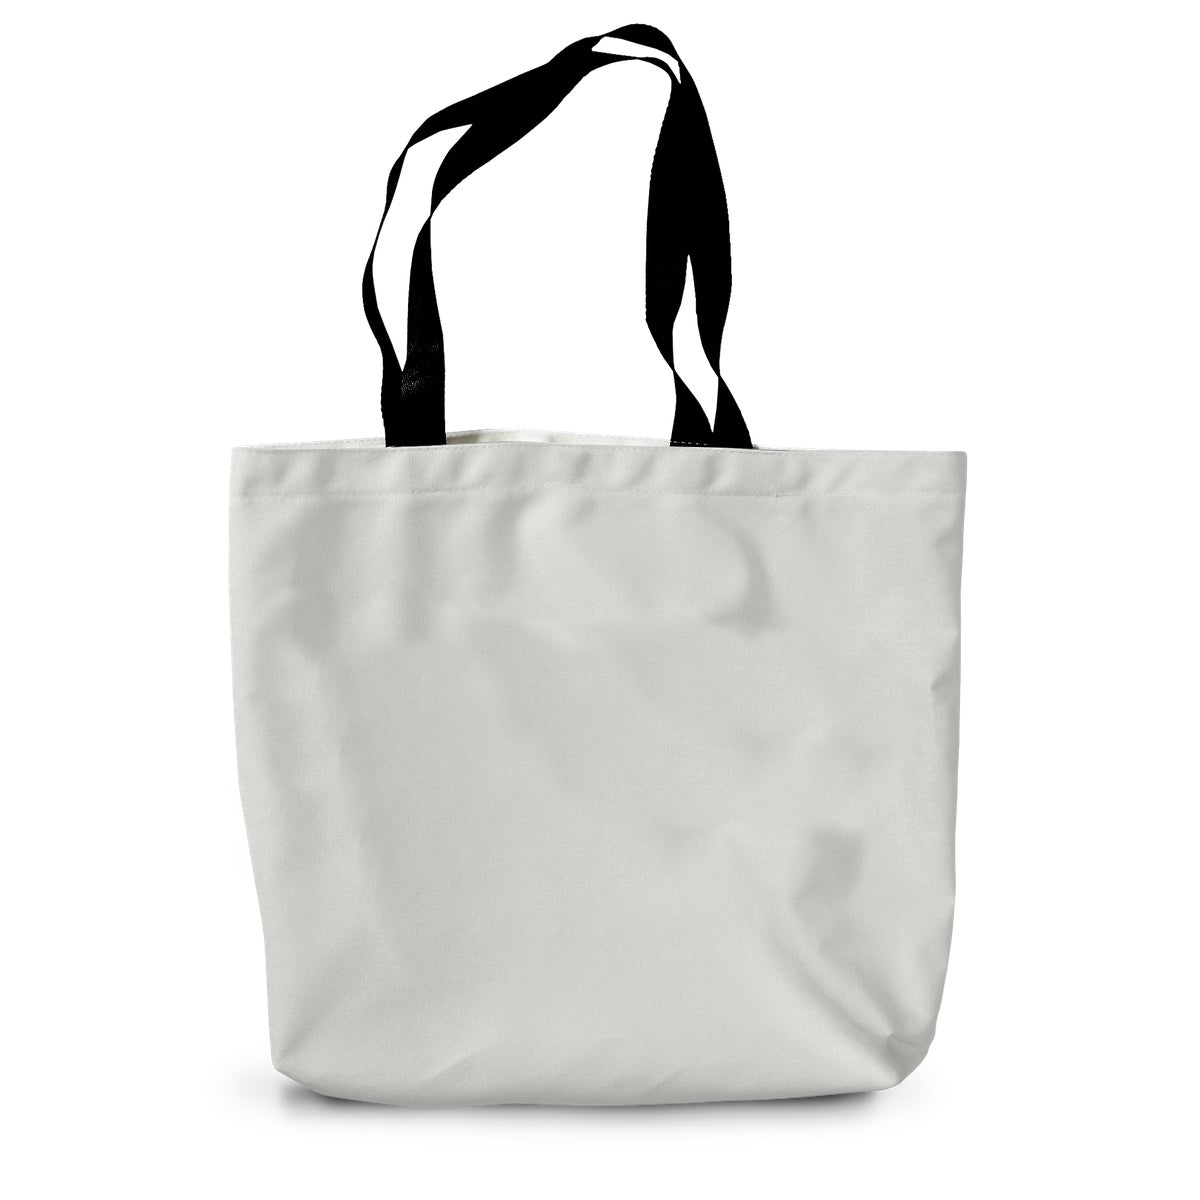 Chatsworth - In Bloom Canvas Tote Bag